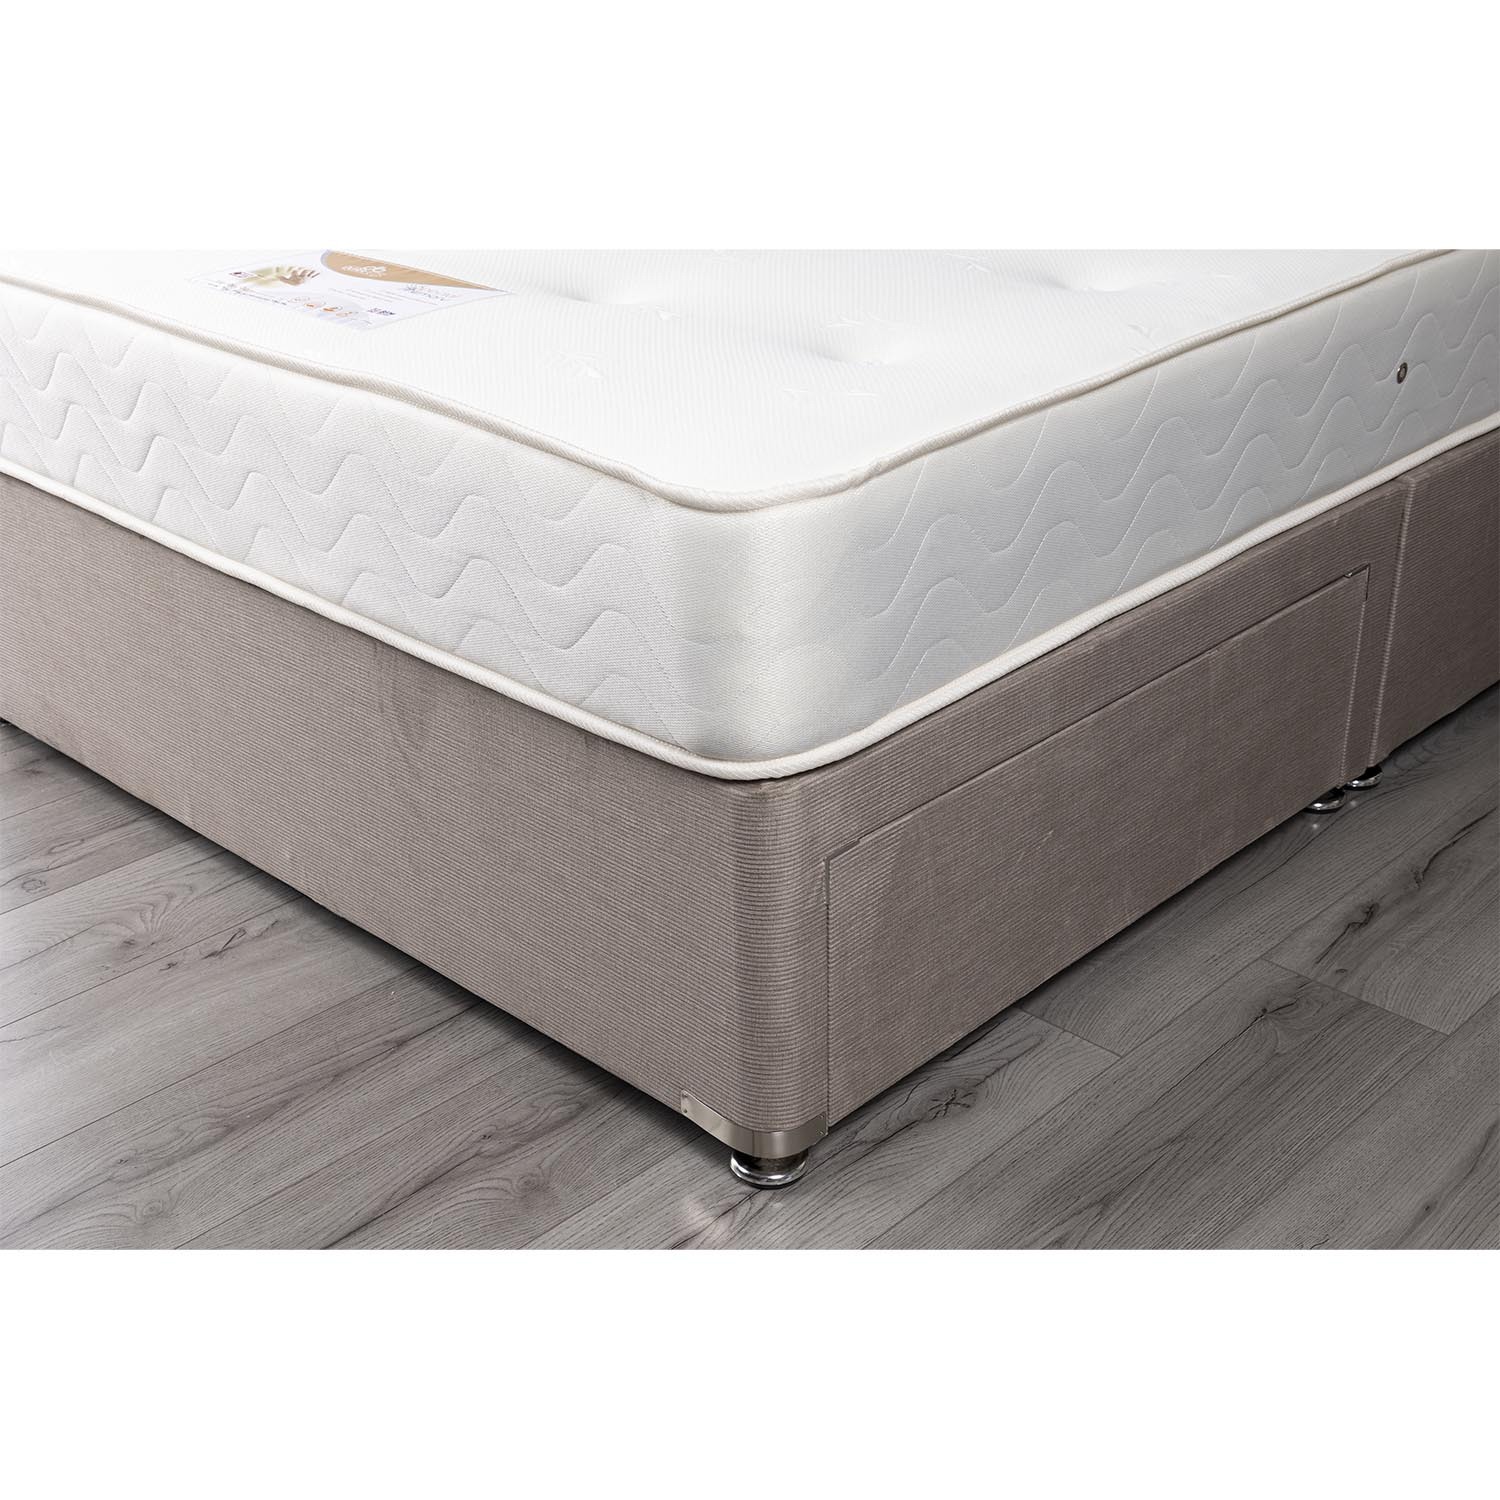 Dura Beds Double White Special Memory Mattress Image 4